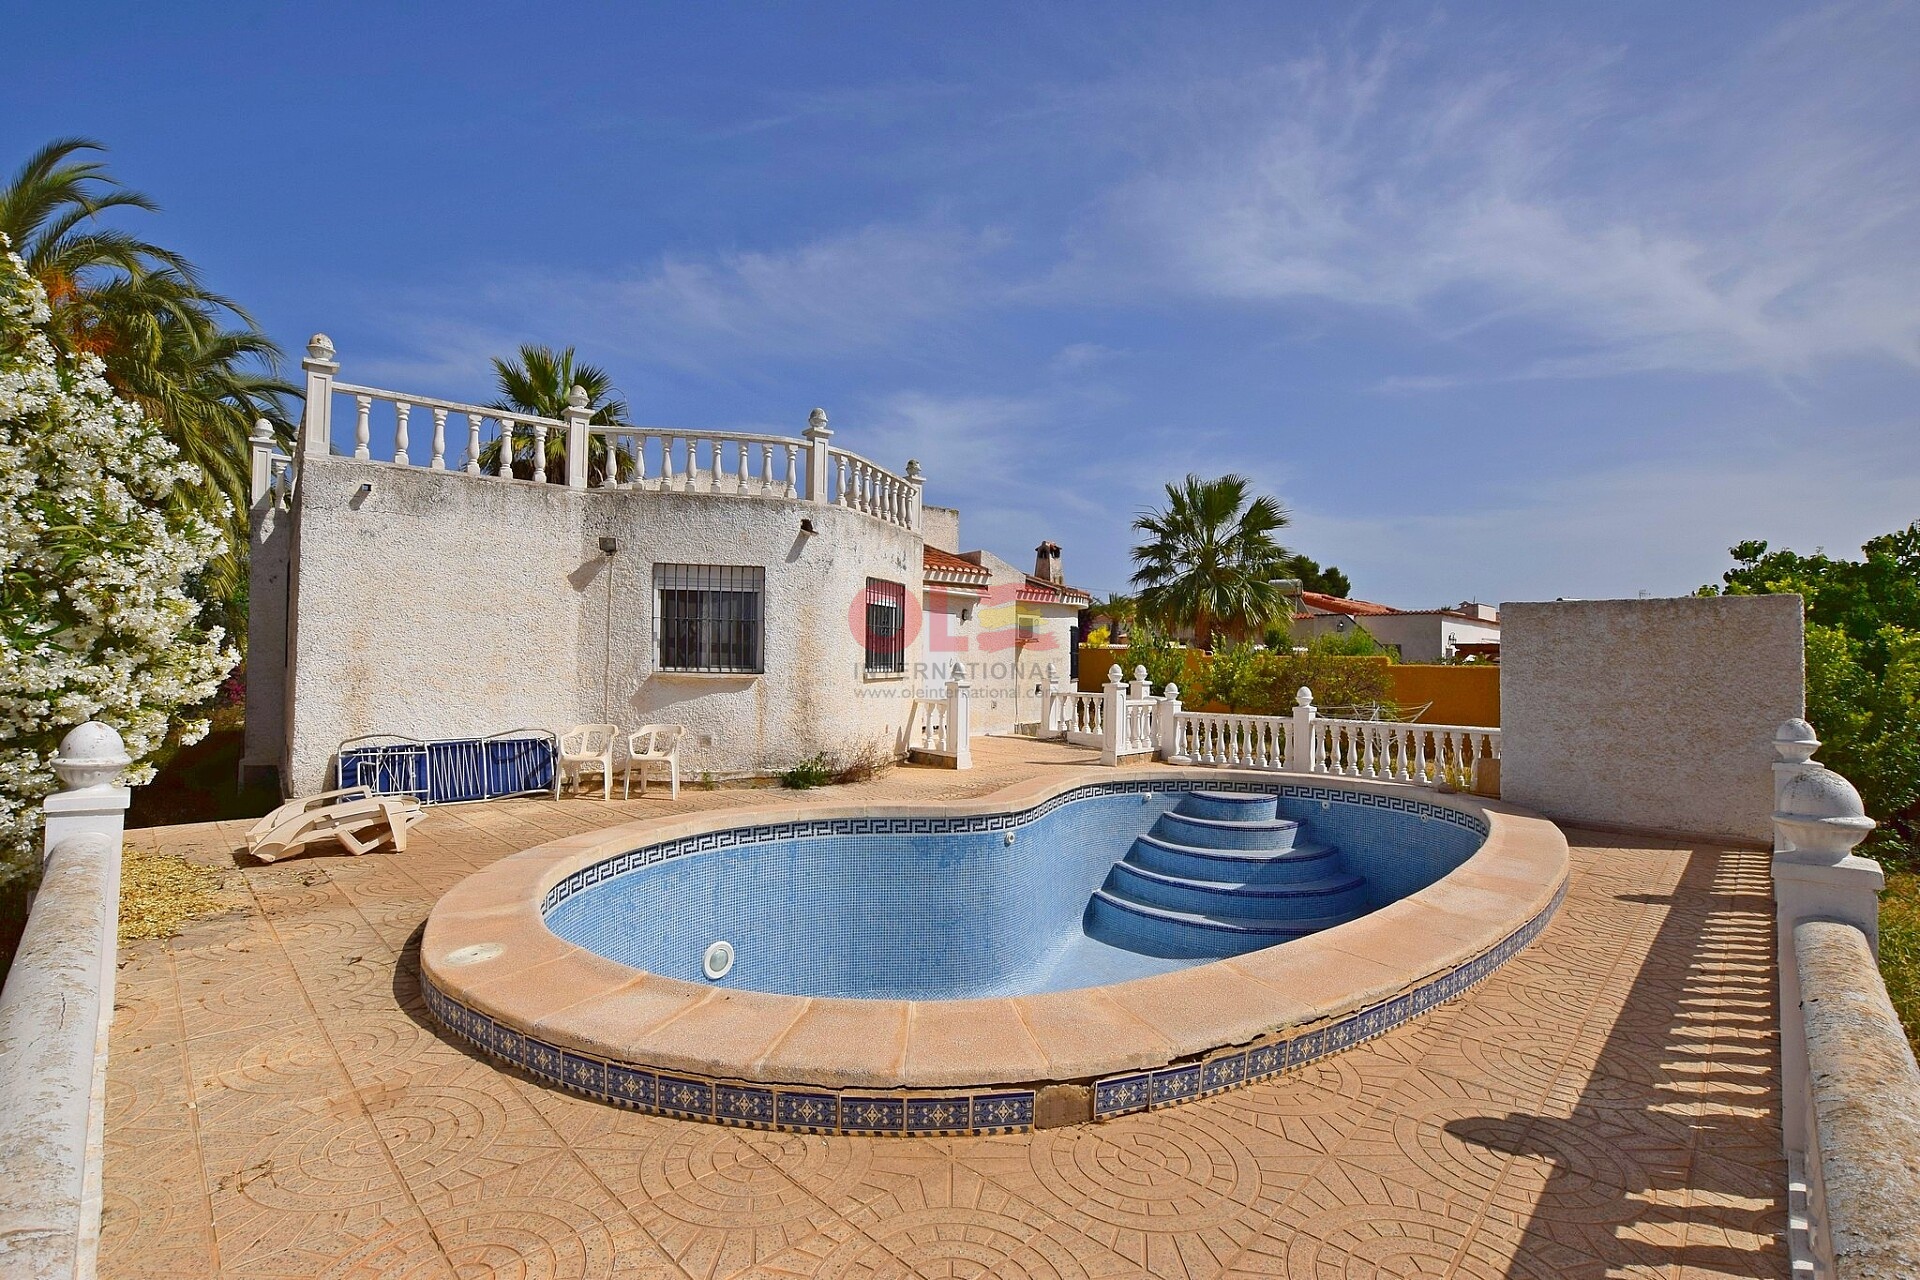 3 beds detached villa to renovate on 800 sq.m. plot near Torrevieja  *